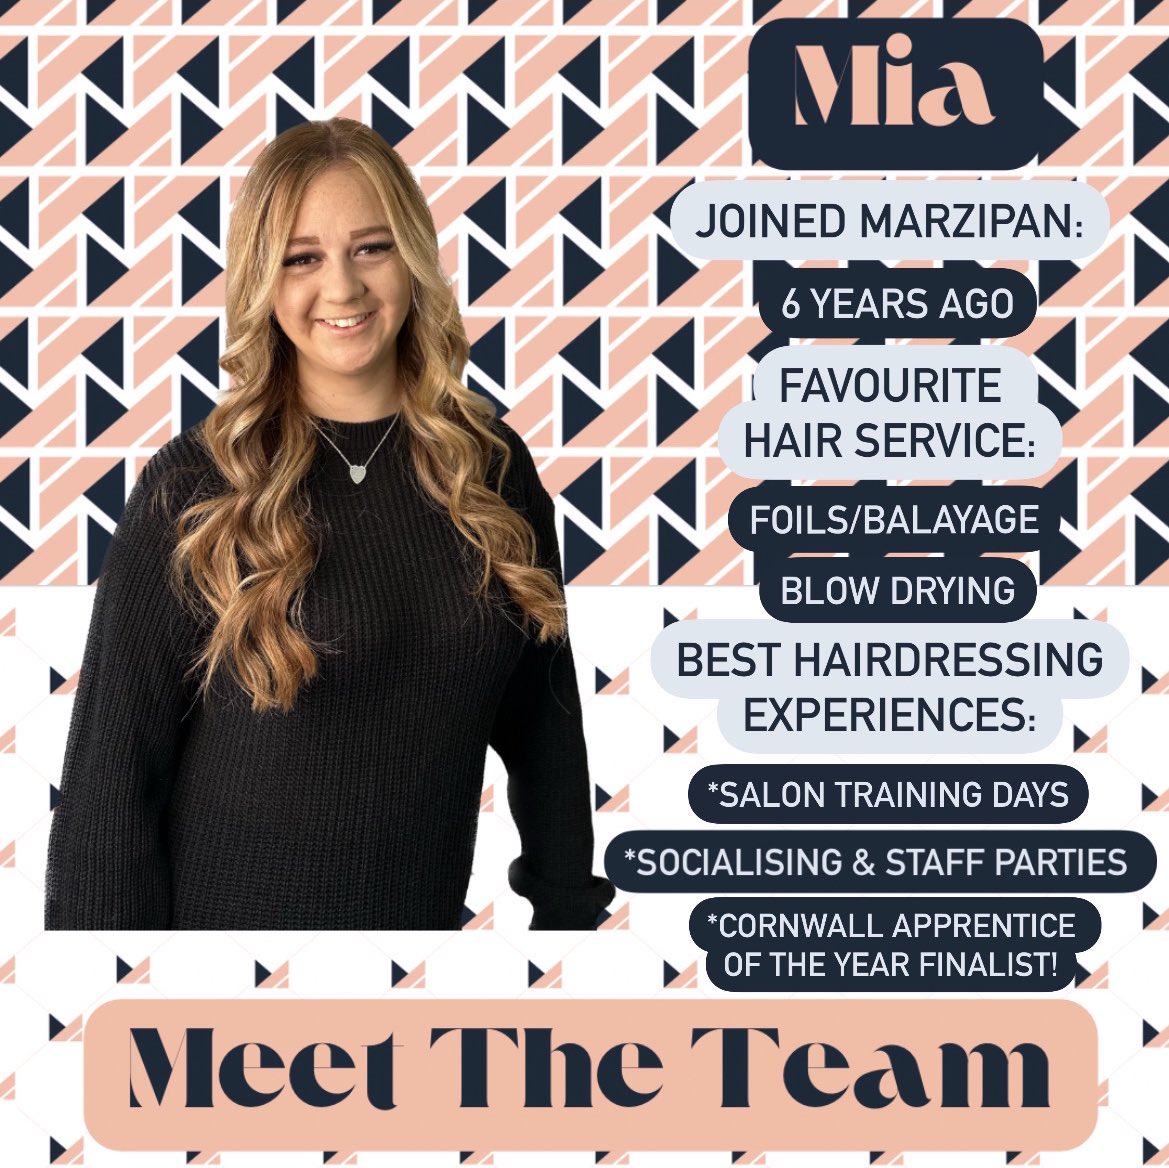 Mia joined us straight from school as an apprentice. Now a popular stylist & a great personality to work with. Mia has a fantastic sense of humour & keeps us all in good spirits 🧡 #marzipanhair #truro #cornwall #ourgreatlittlecity #loveyourhair #trurocornwall #trurohairsalon